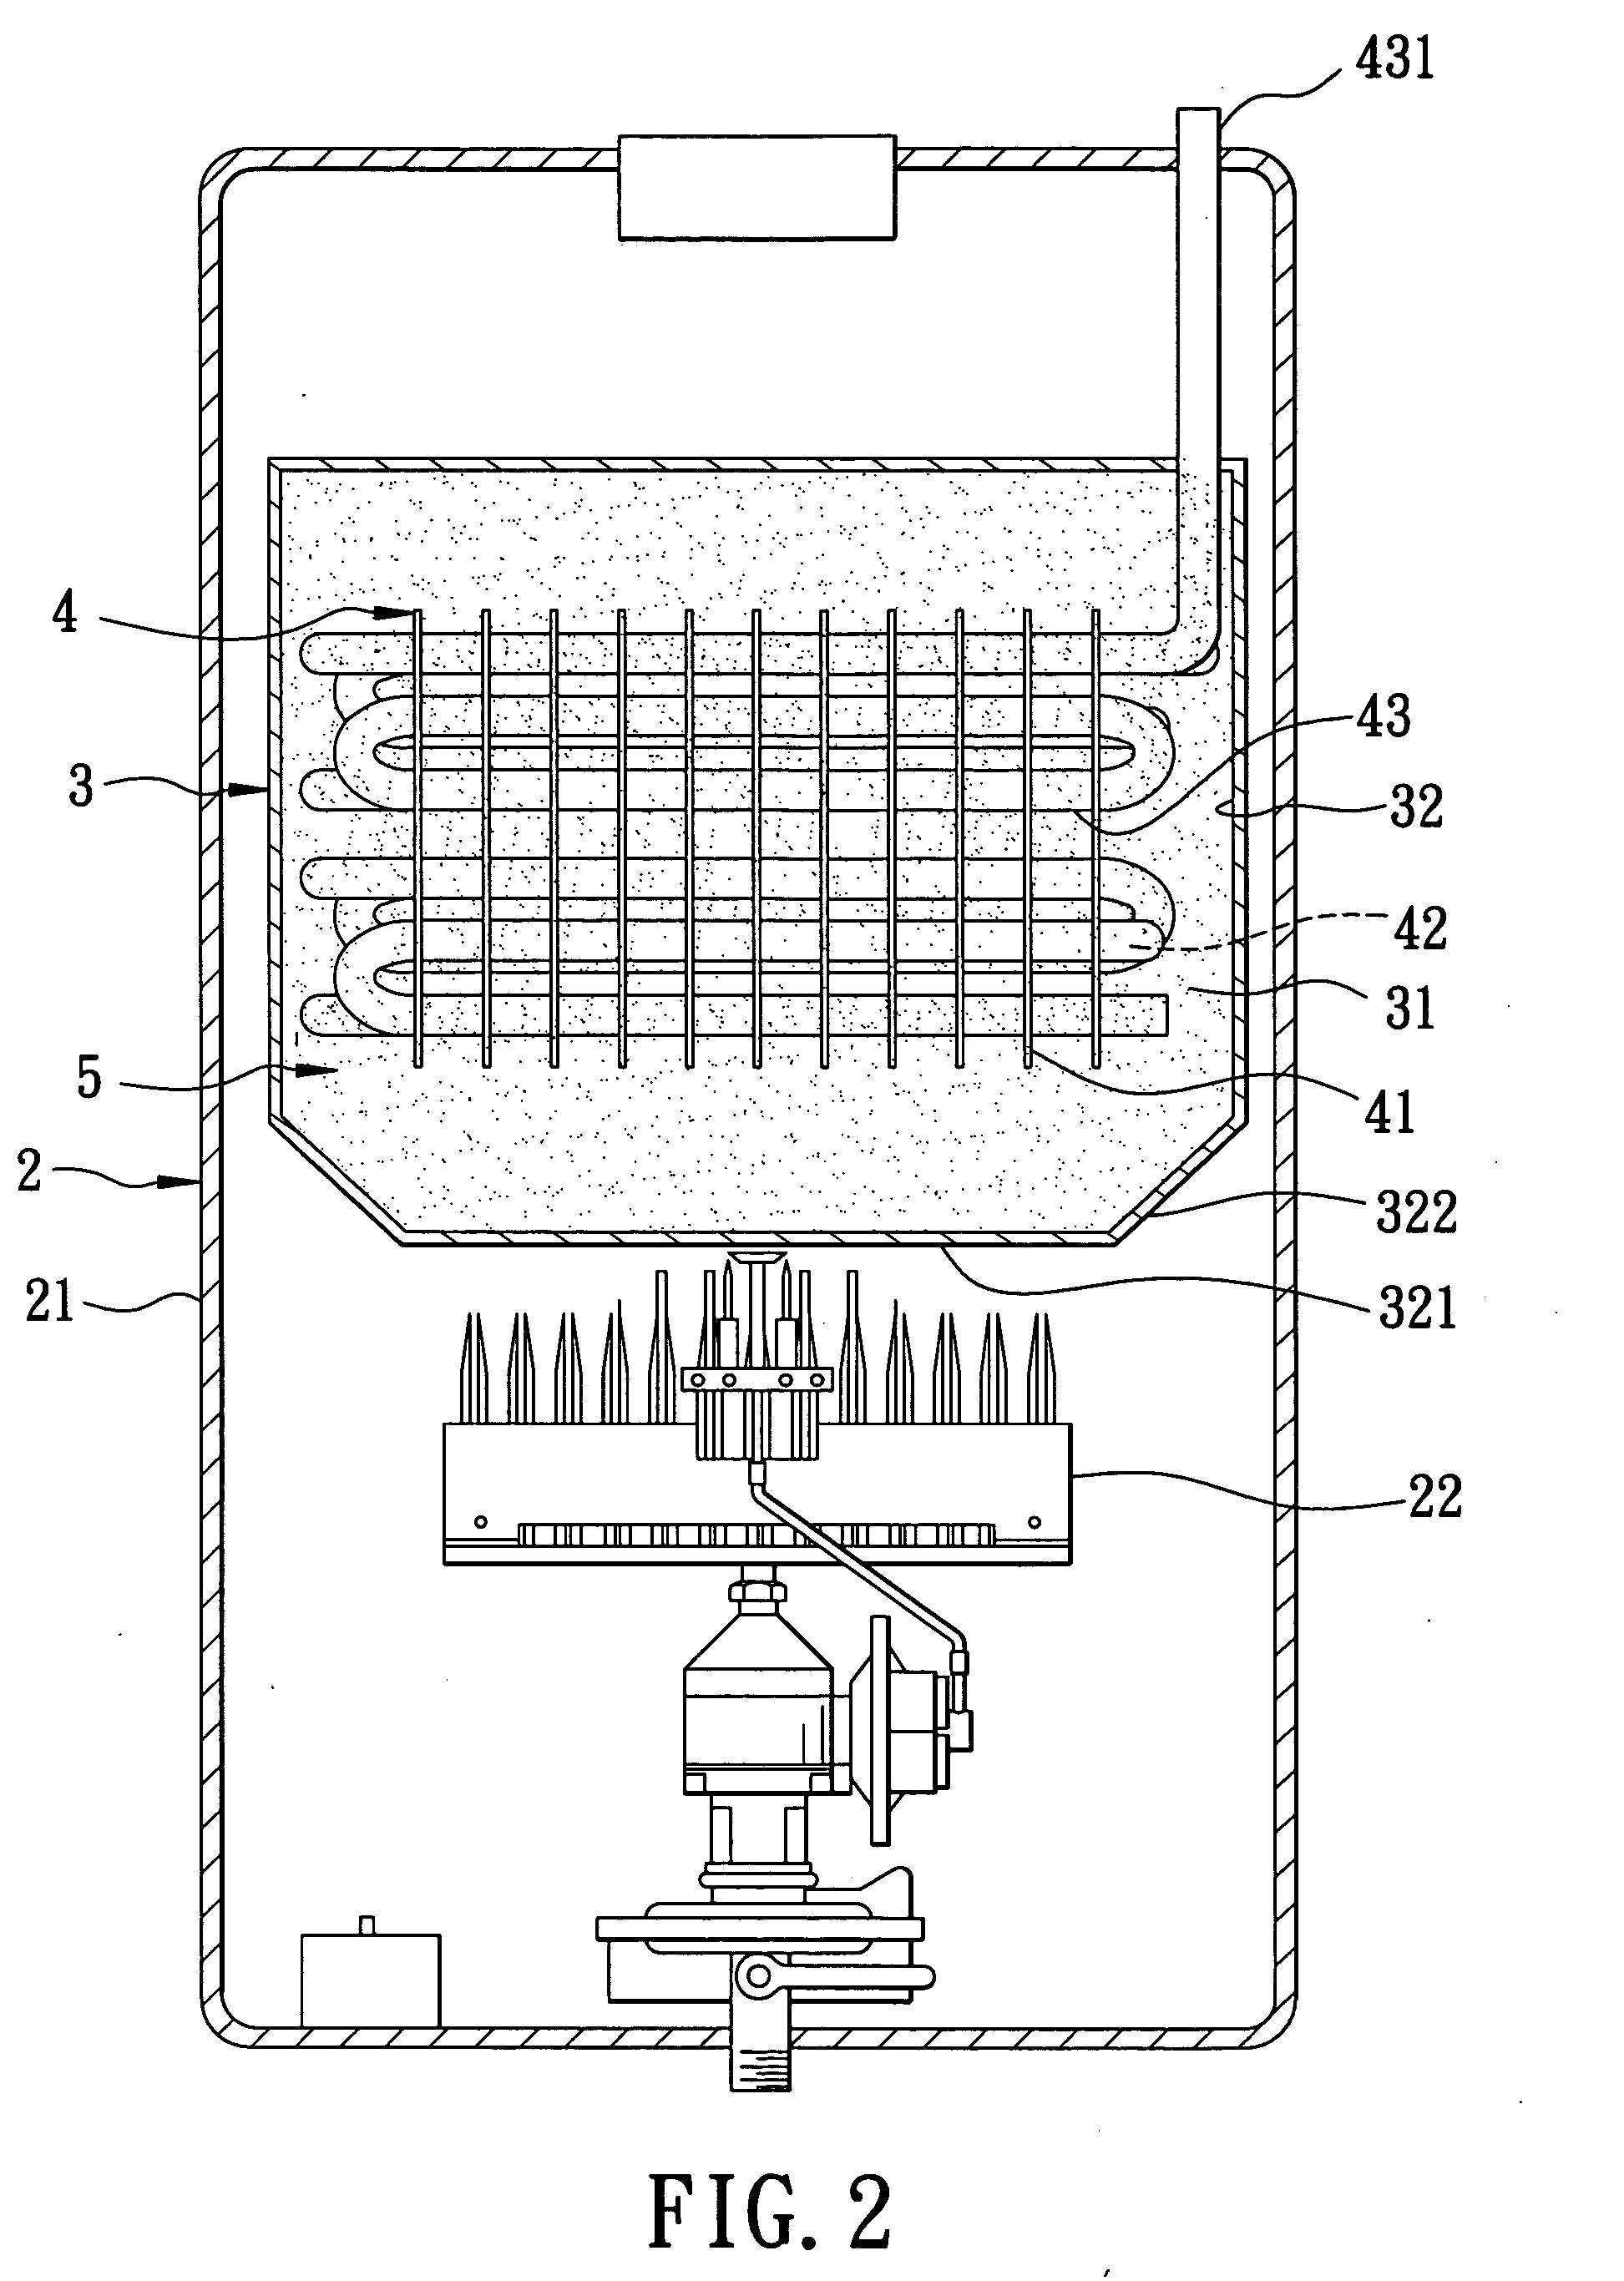 Heat conducting assembly for a water heater, and method for making the heat conducting assembly